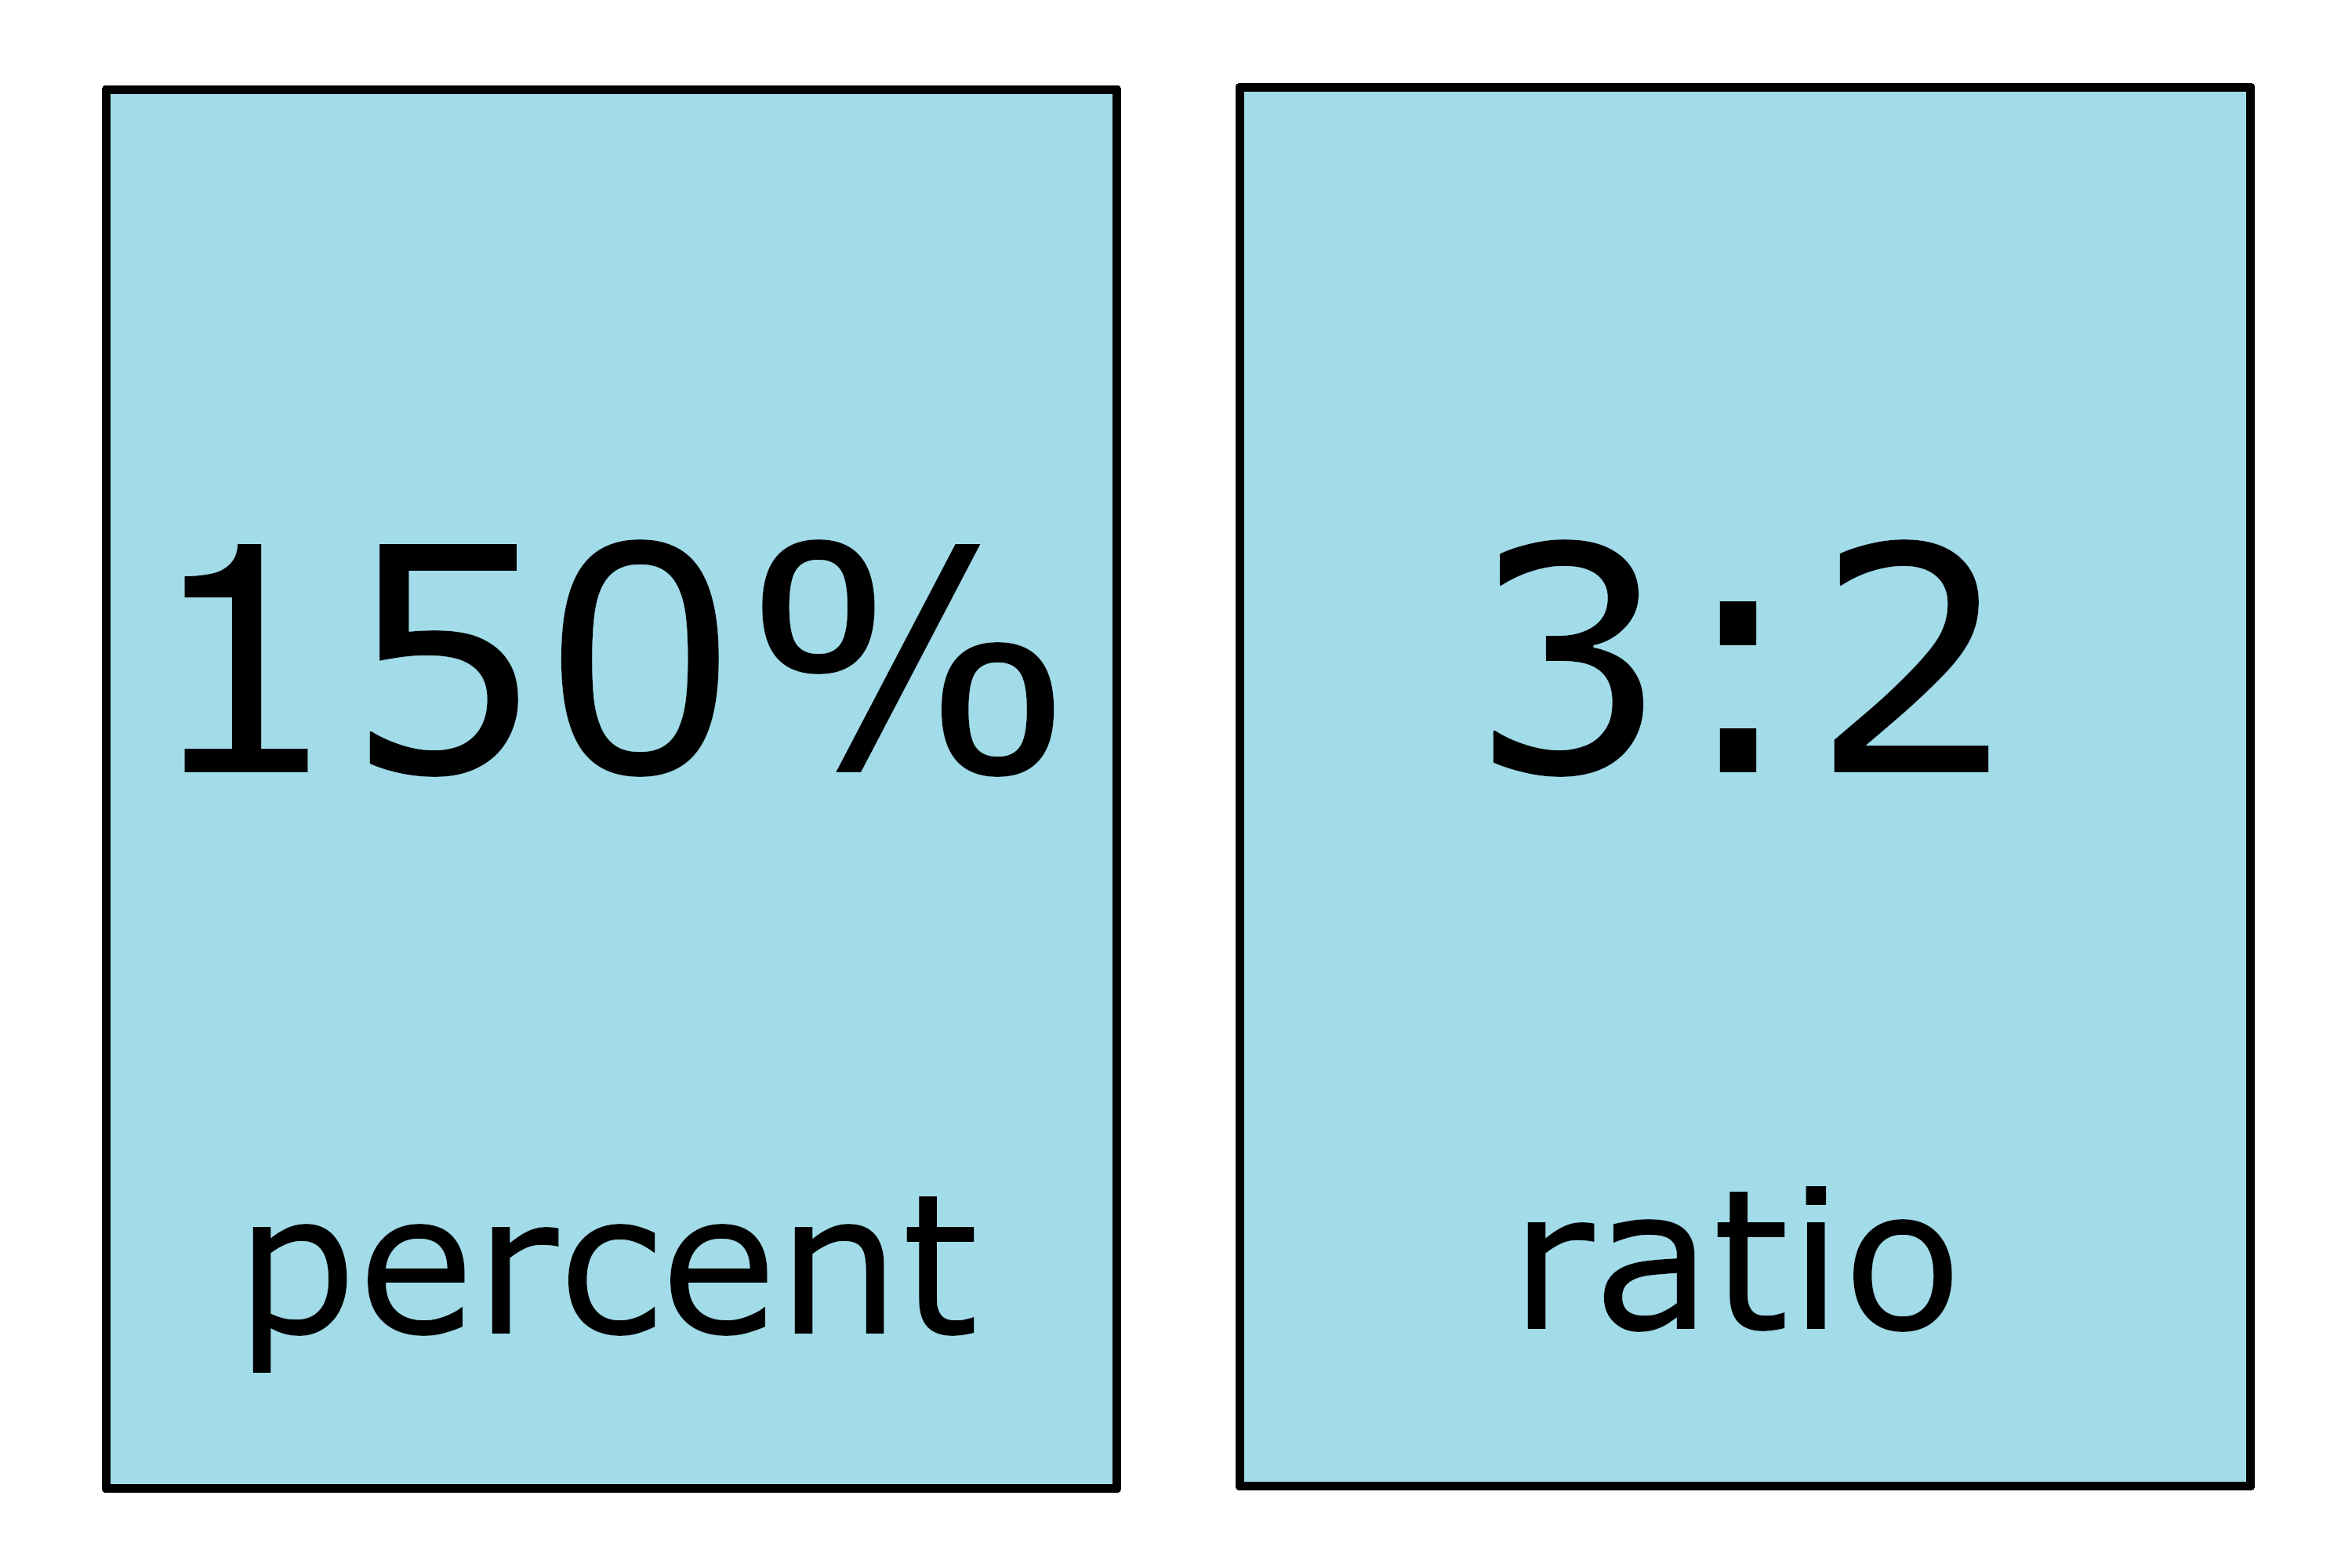 illustration showing that 150% is equal to the ratio 3:2